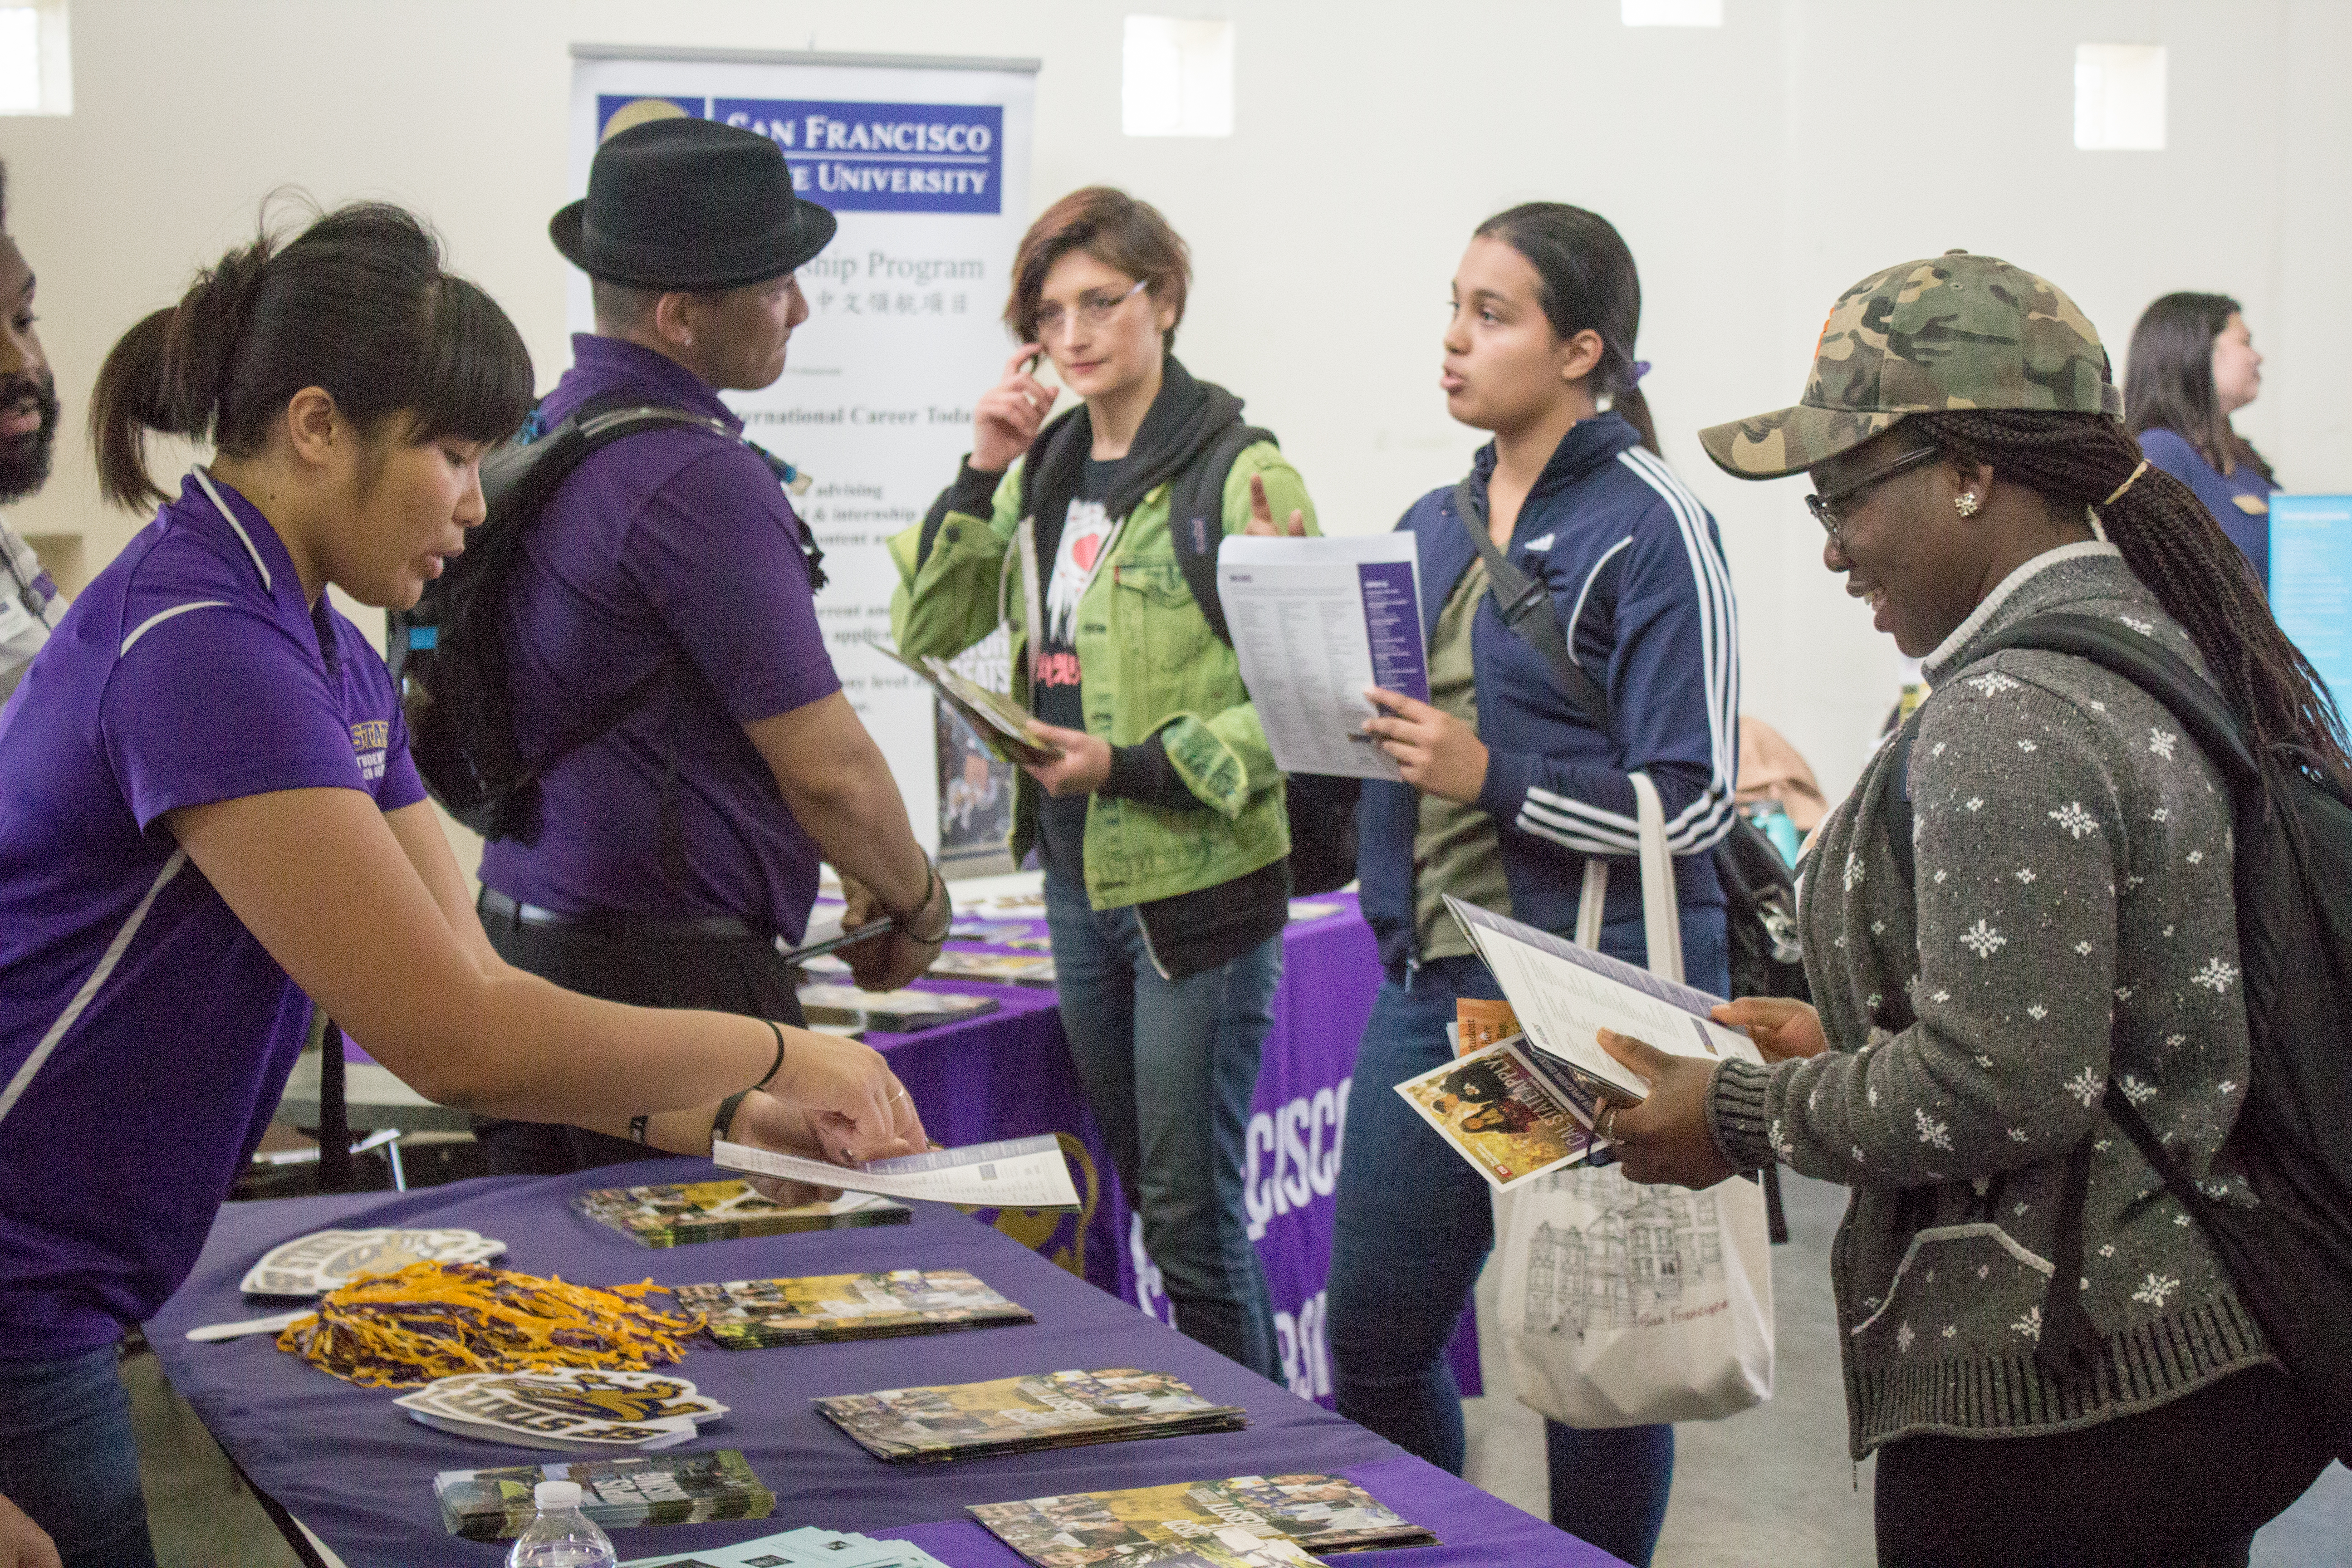 San Francisco State  University Outreach Specialist Tabitha Hurdle, left, provides school information for City College student Stellamaris Nwihim, right. Photo by Peter J Suter/The Guardsman